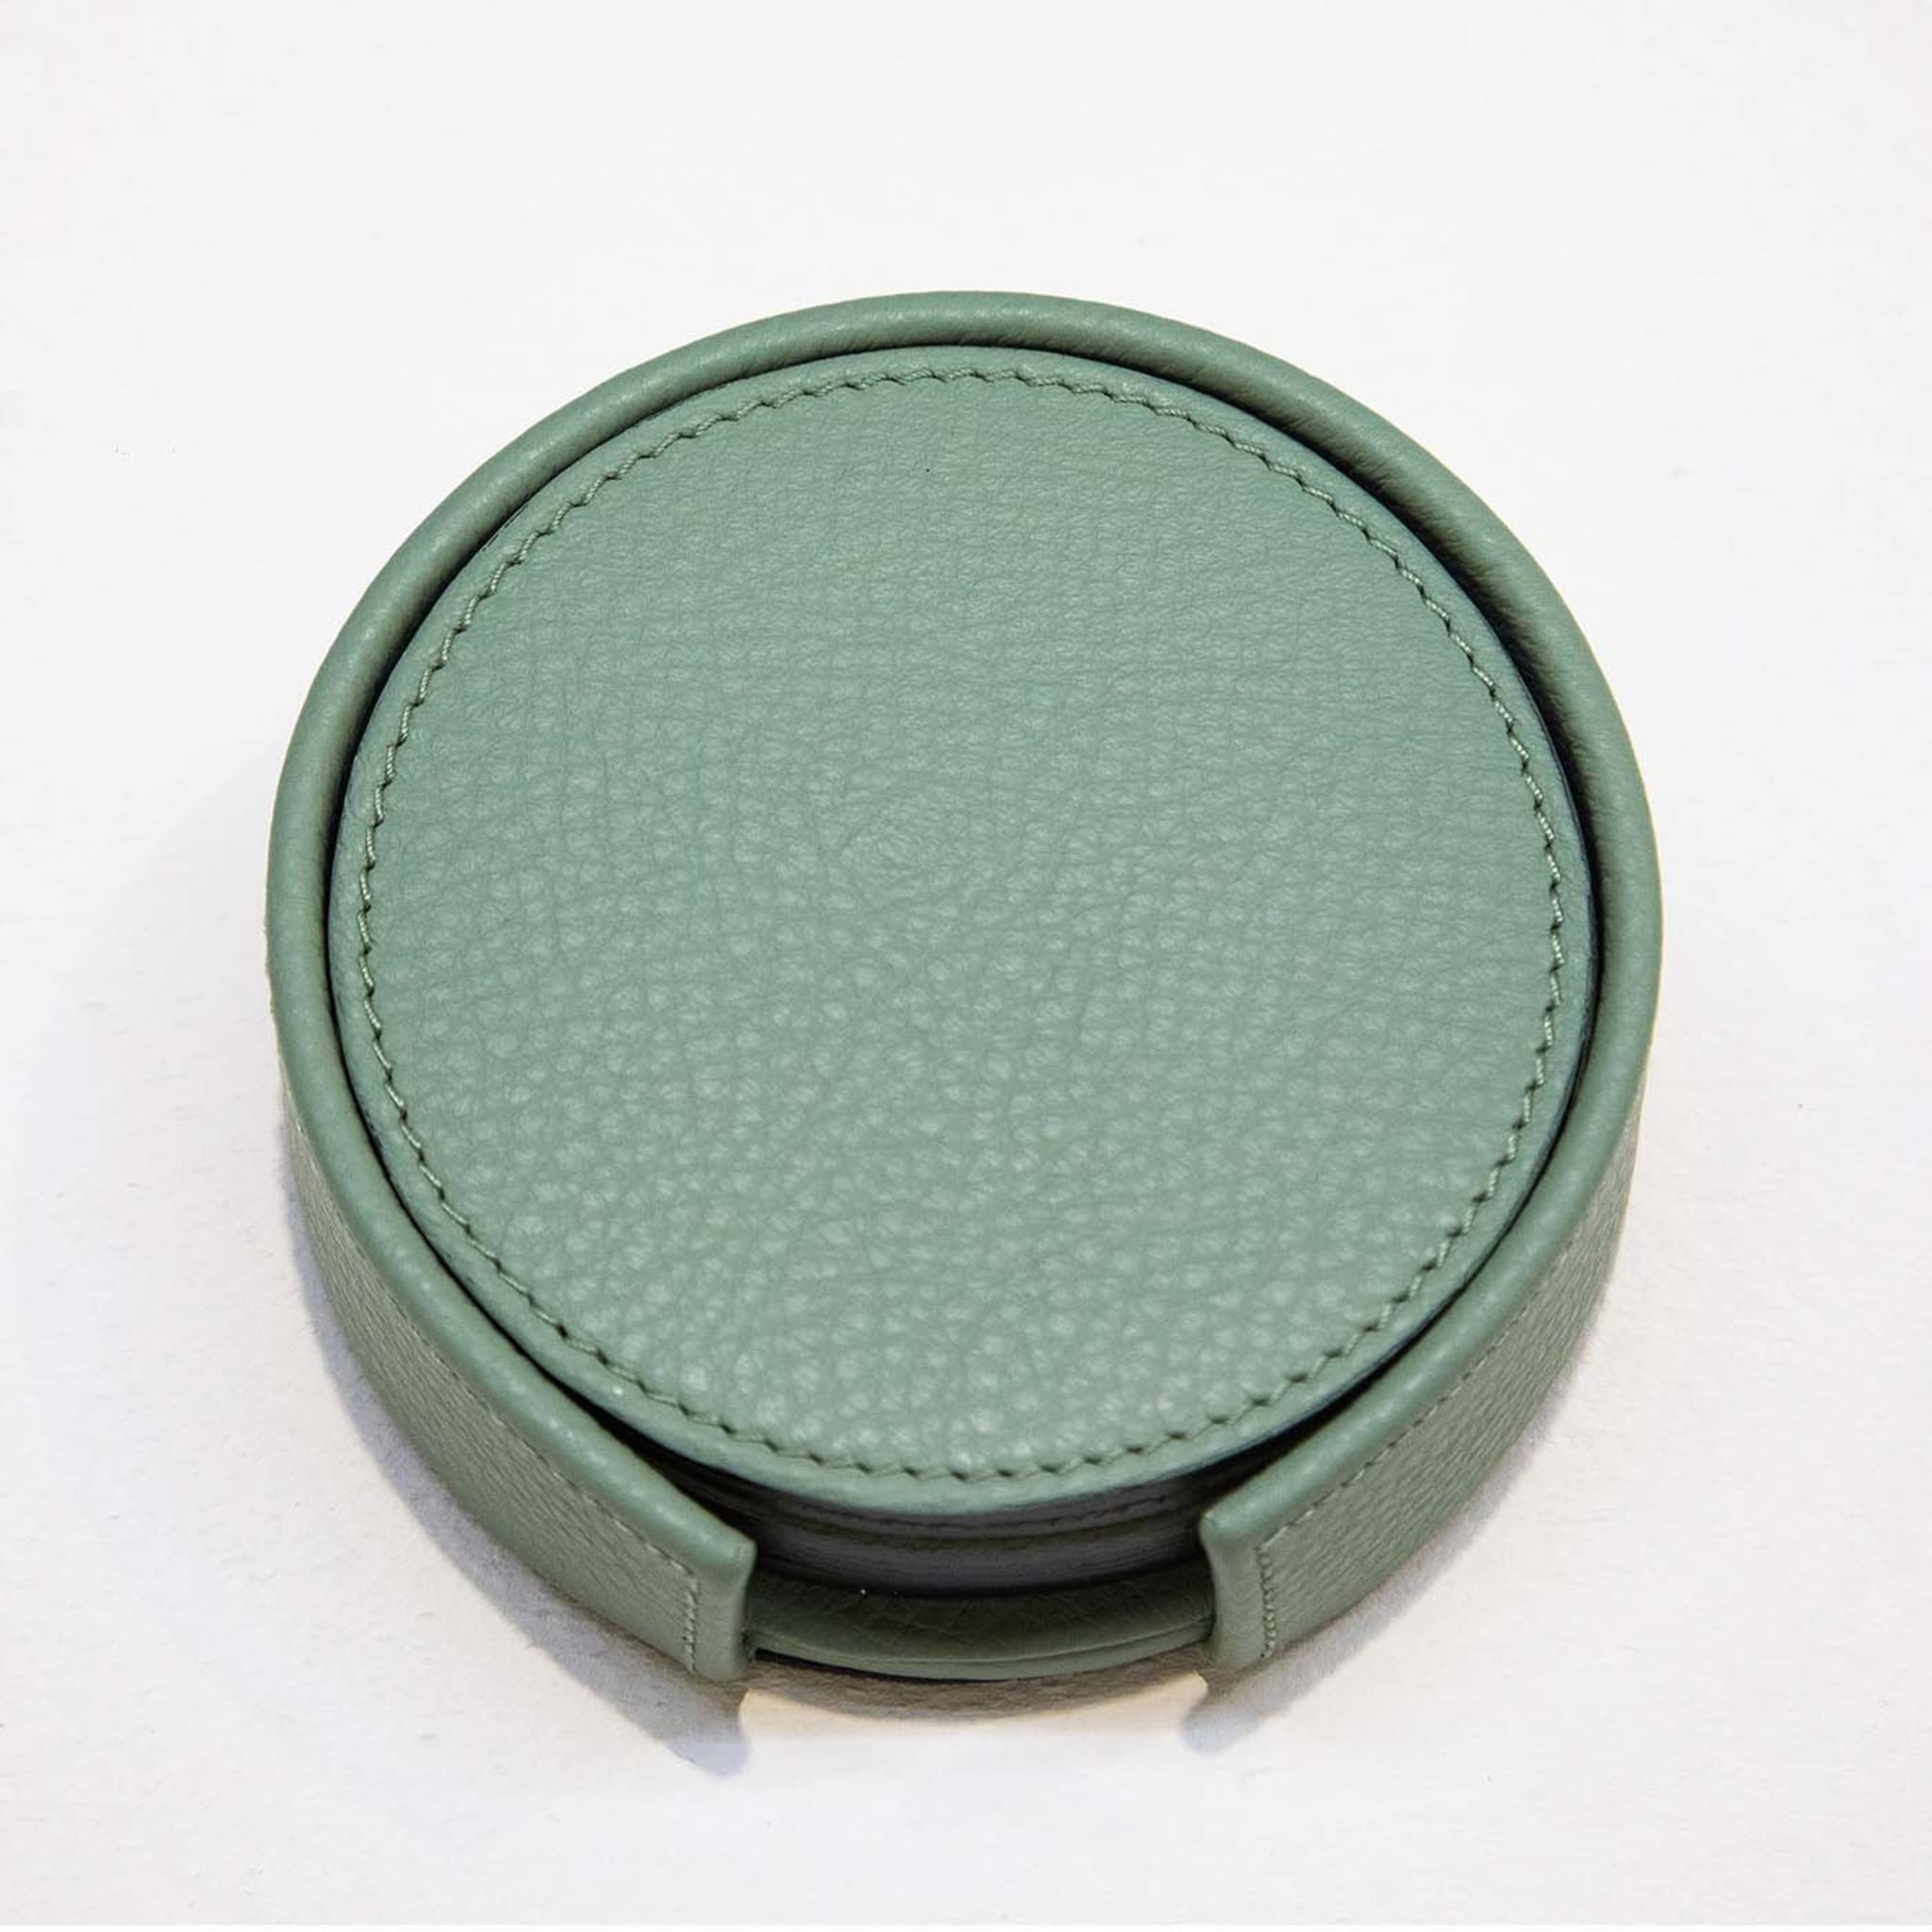 Set of 6 Leather Coasters in Sage Green - Alternative view 1